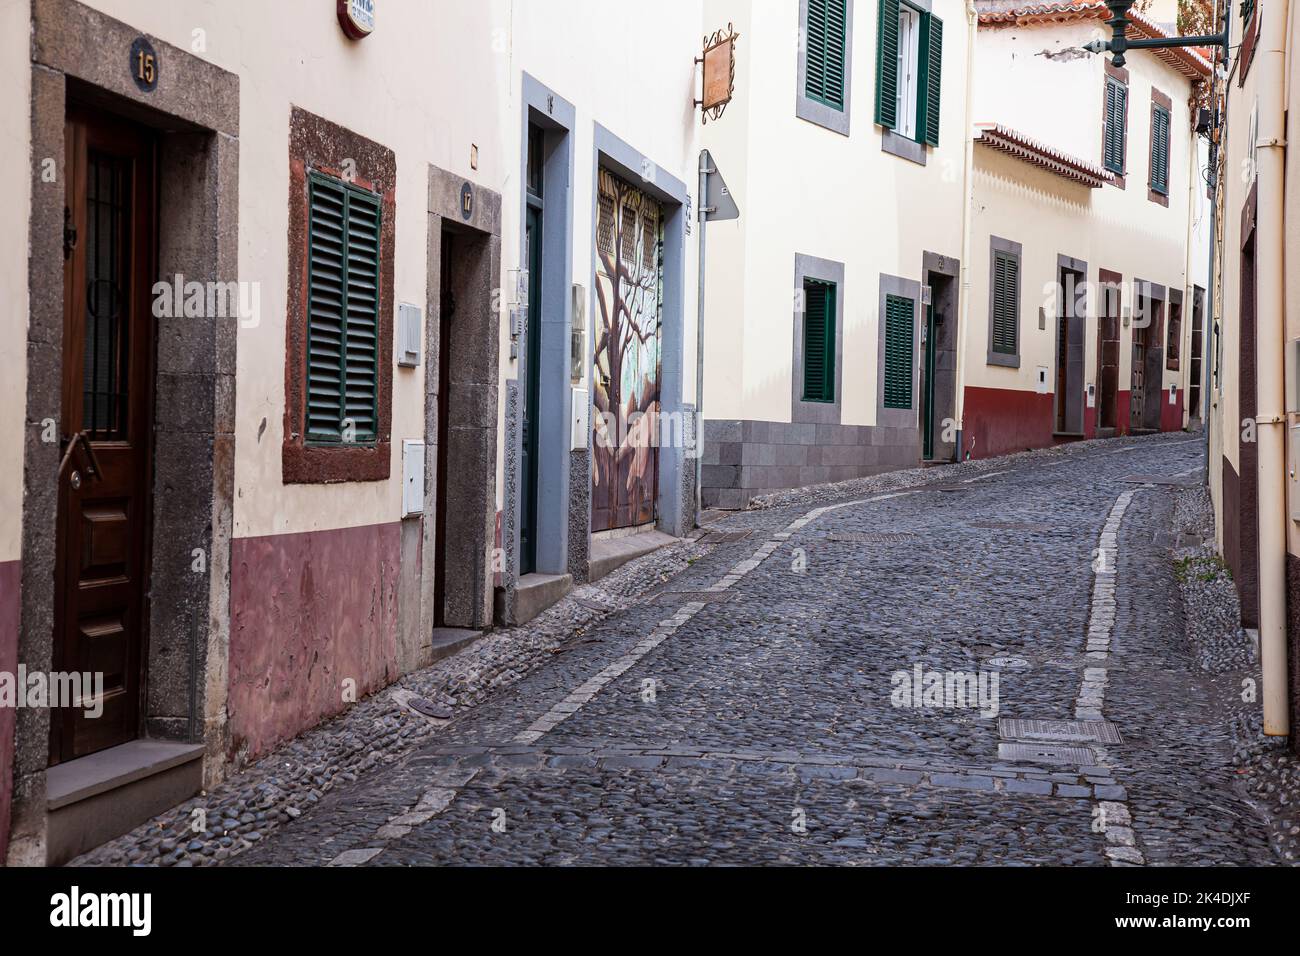 Alley in the,old town,Madeira,Portugal,Europe Stock Photo